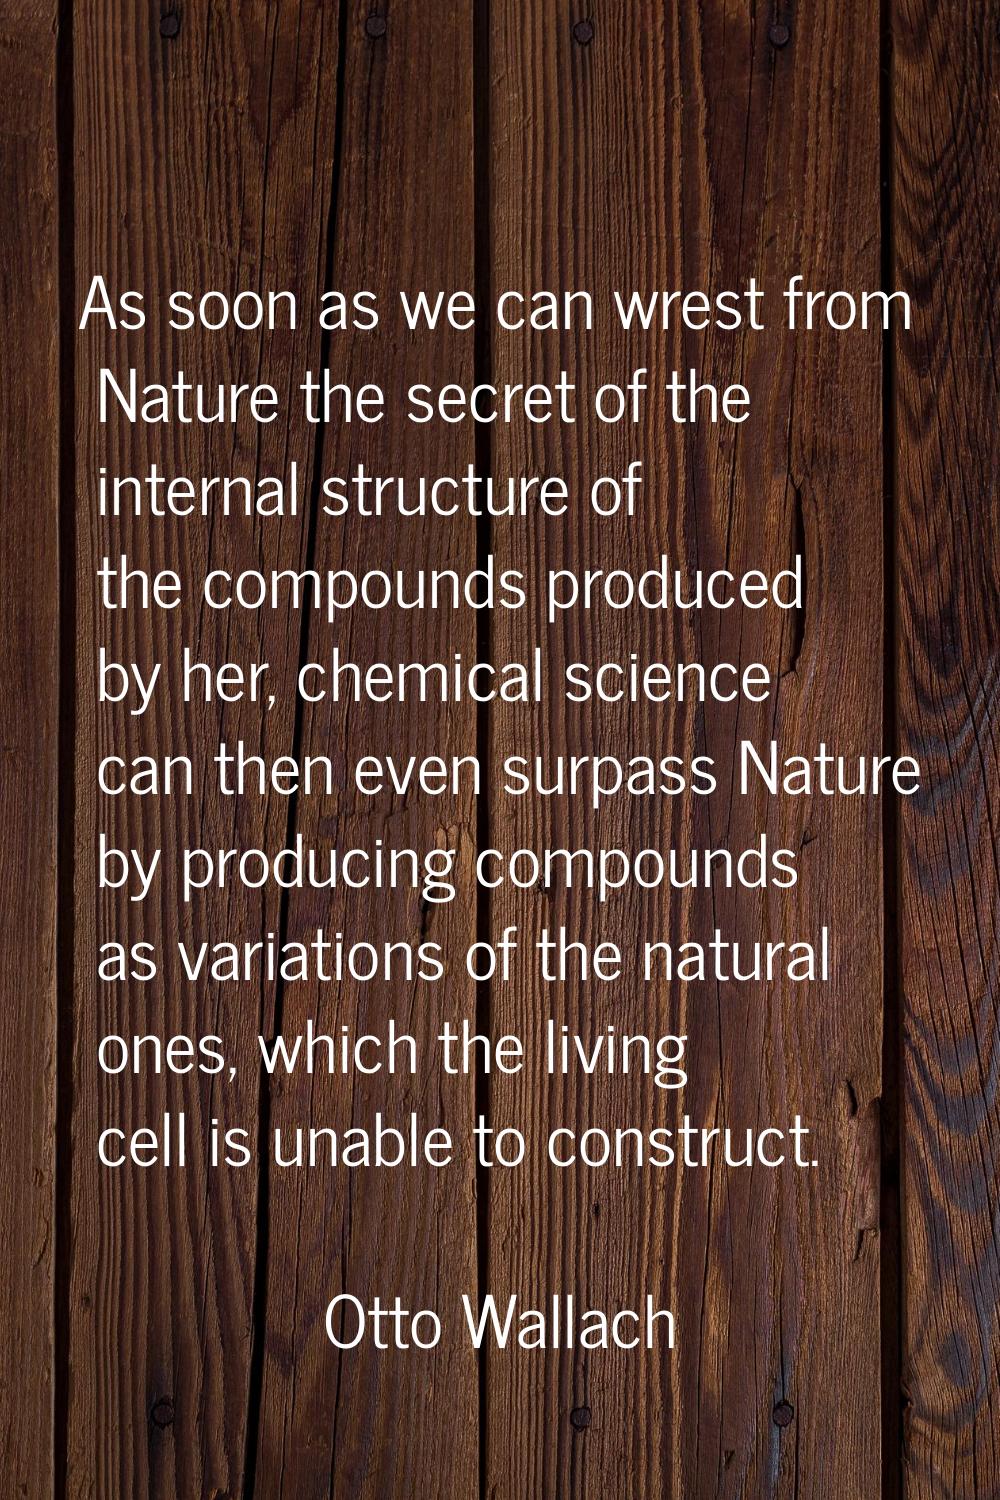 As soon as we can wrest from Nature the secret of the internal structure of the compounds produced 